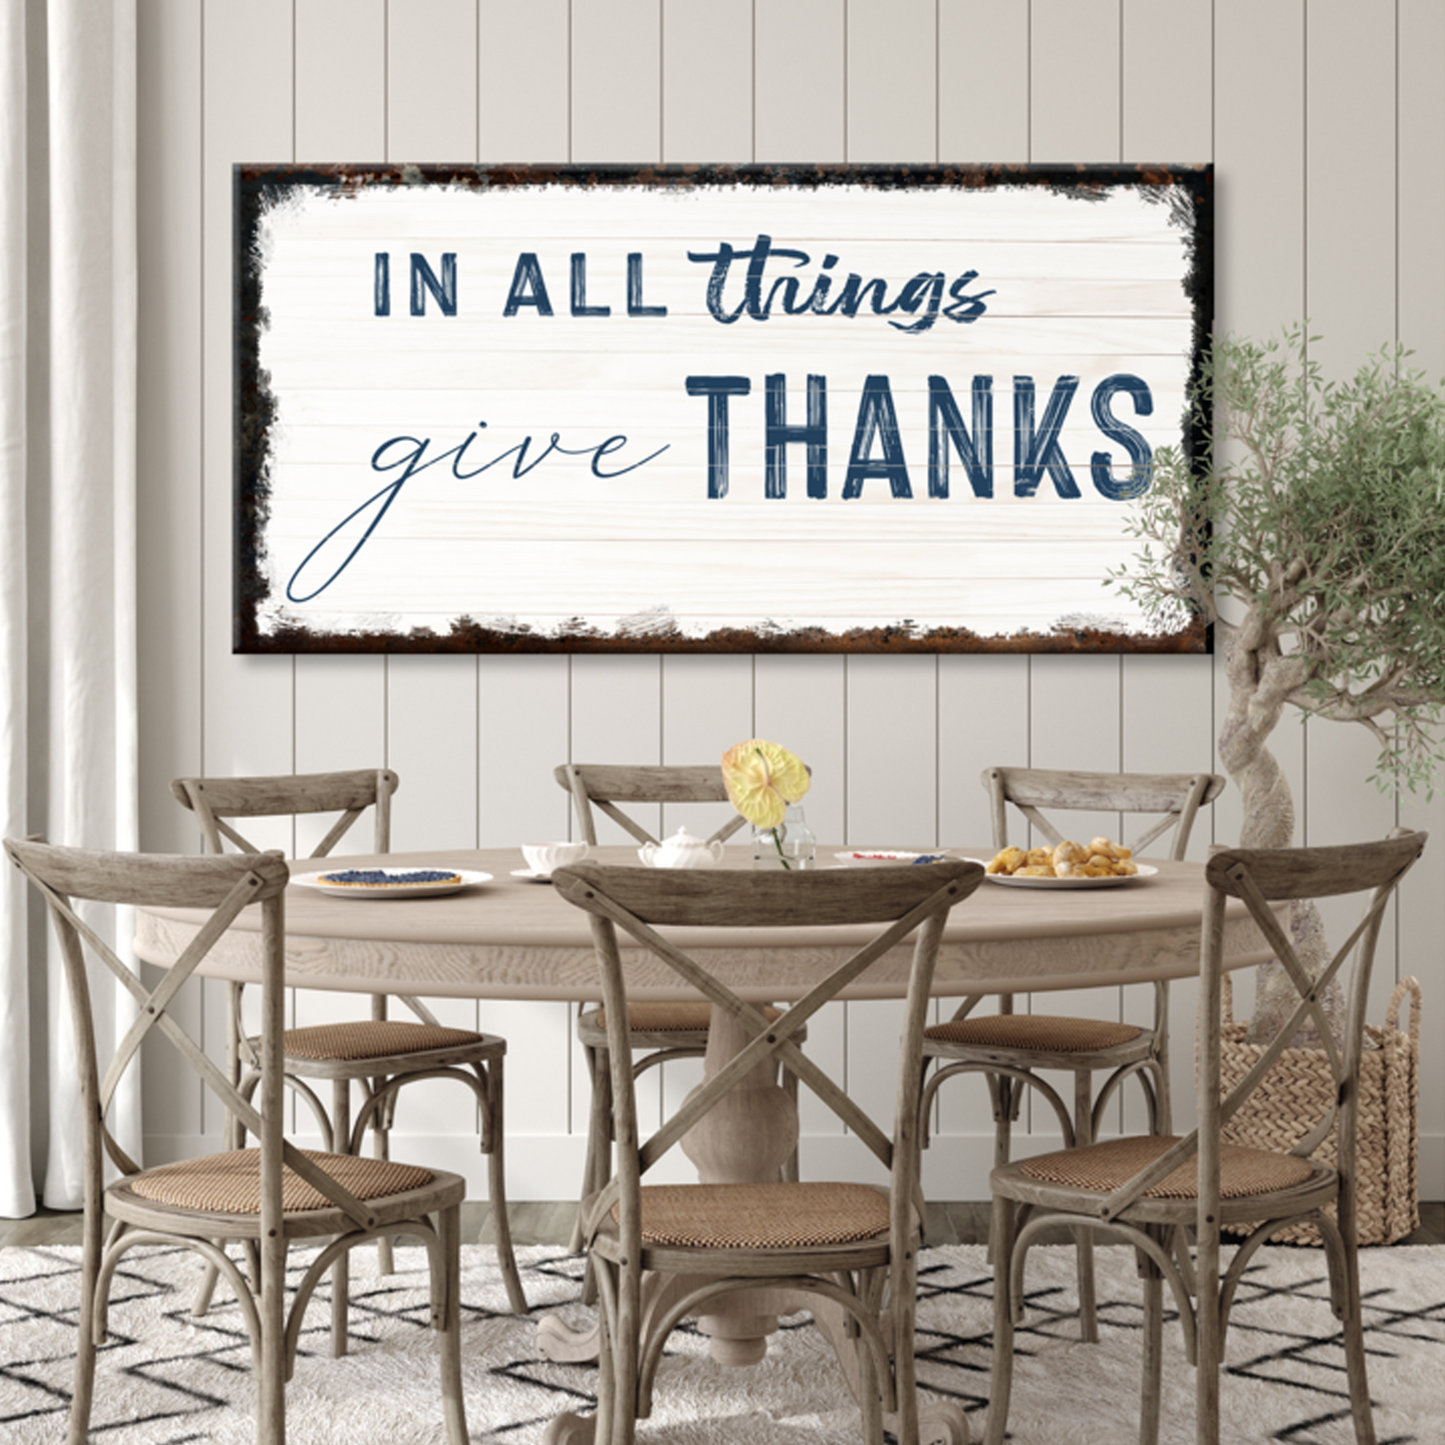 In All Things Give Thanks Sign II - Image by Tailored Canvases